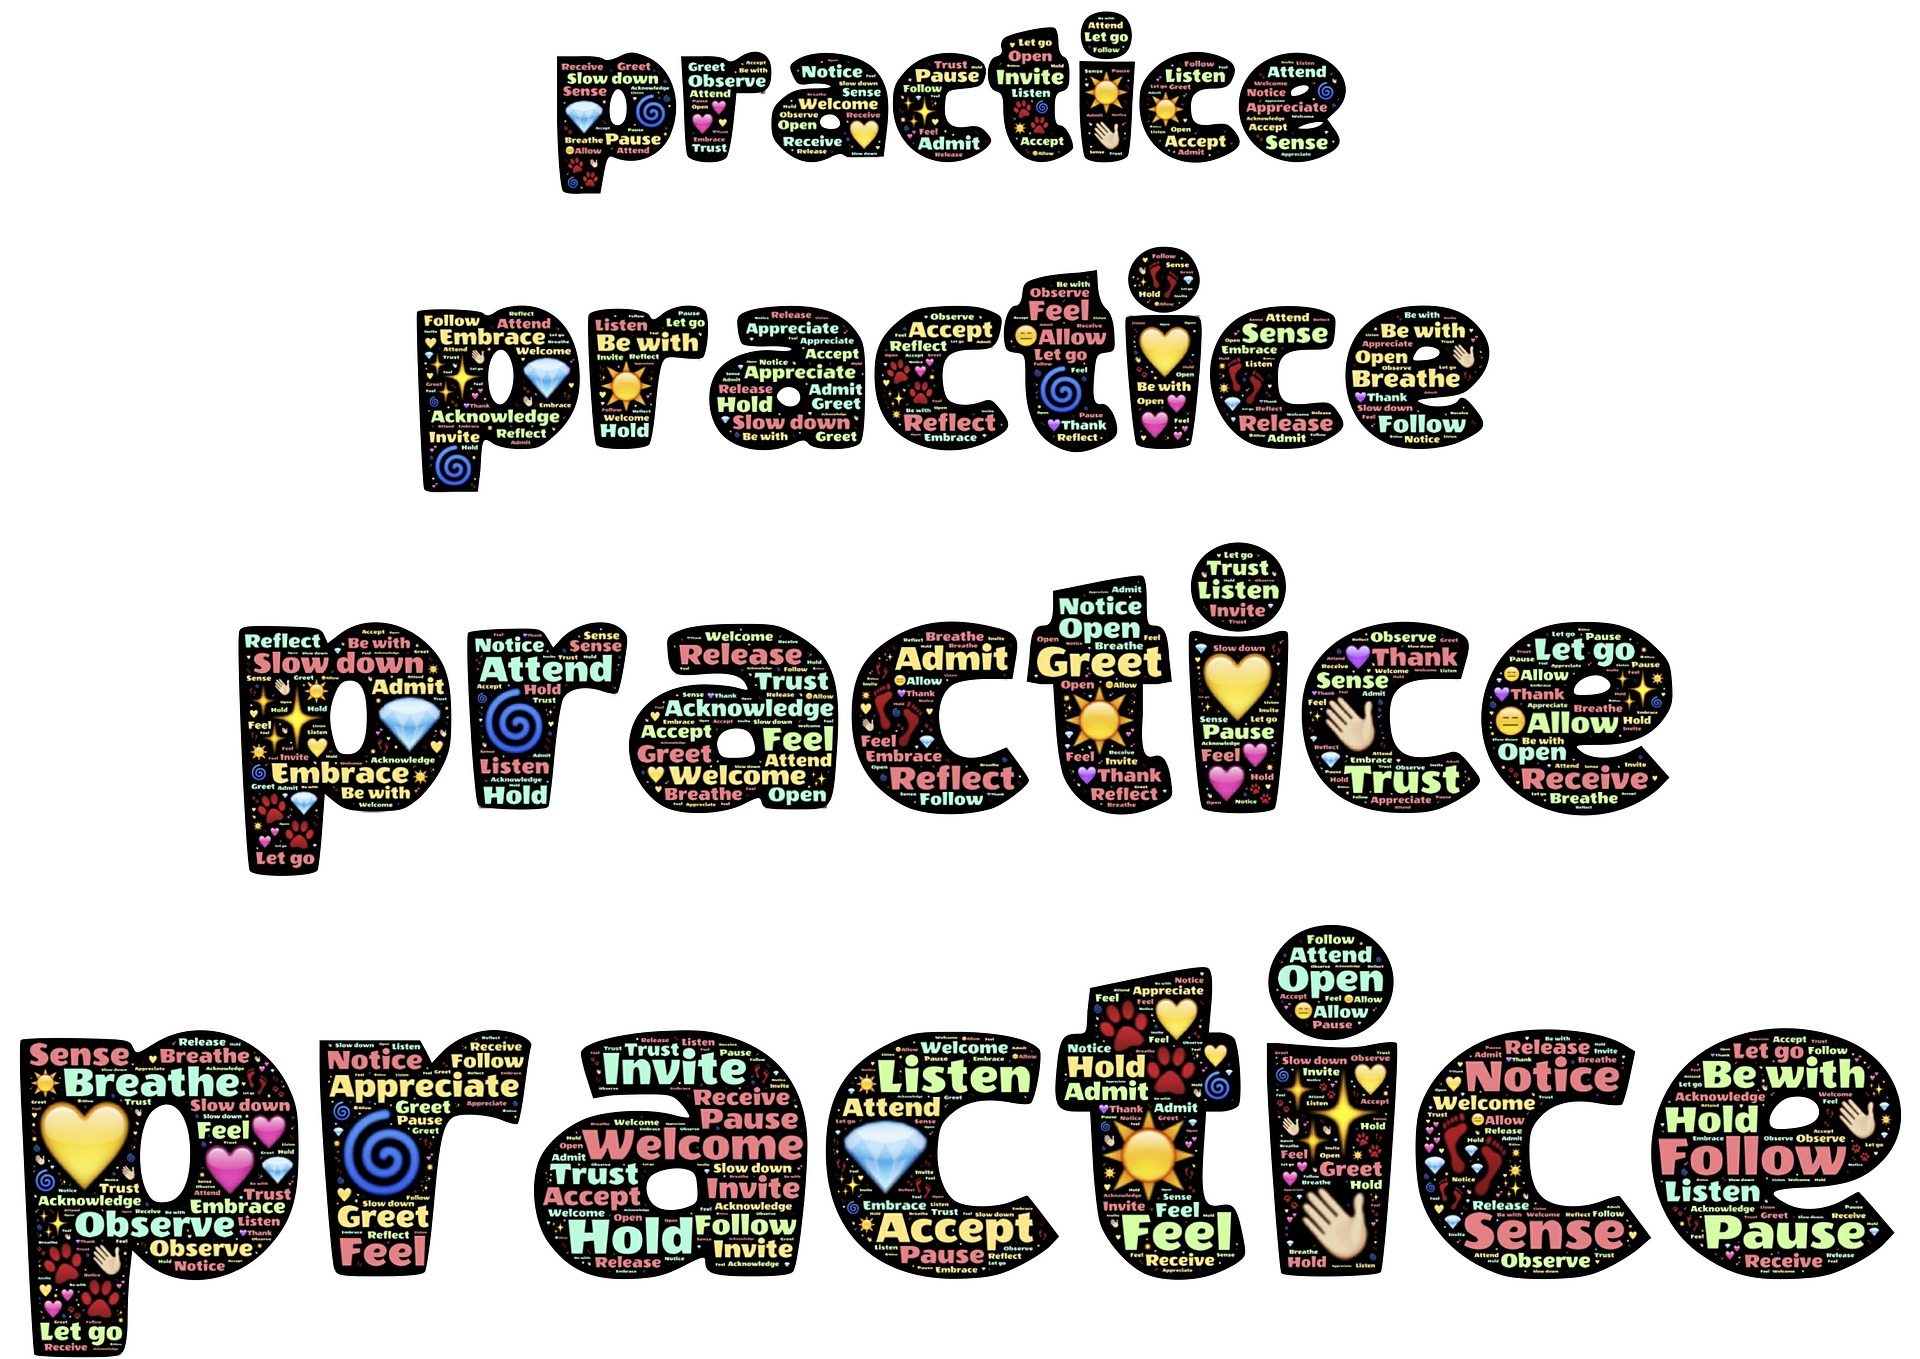 Does practice make perfect or permanent?